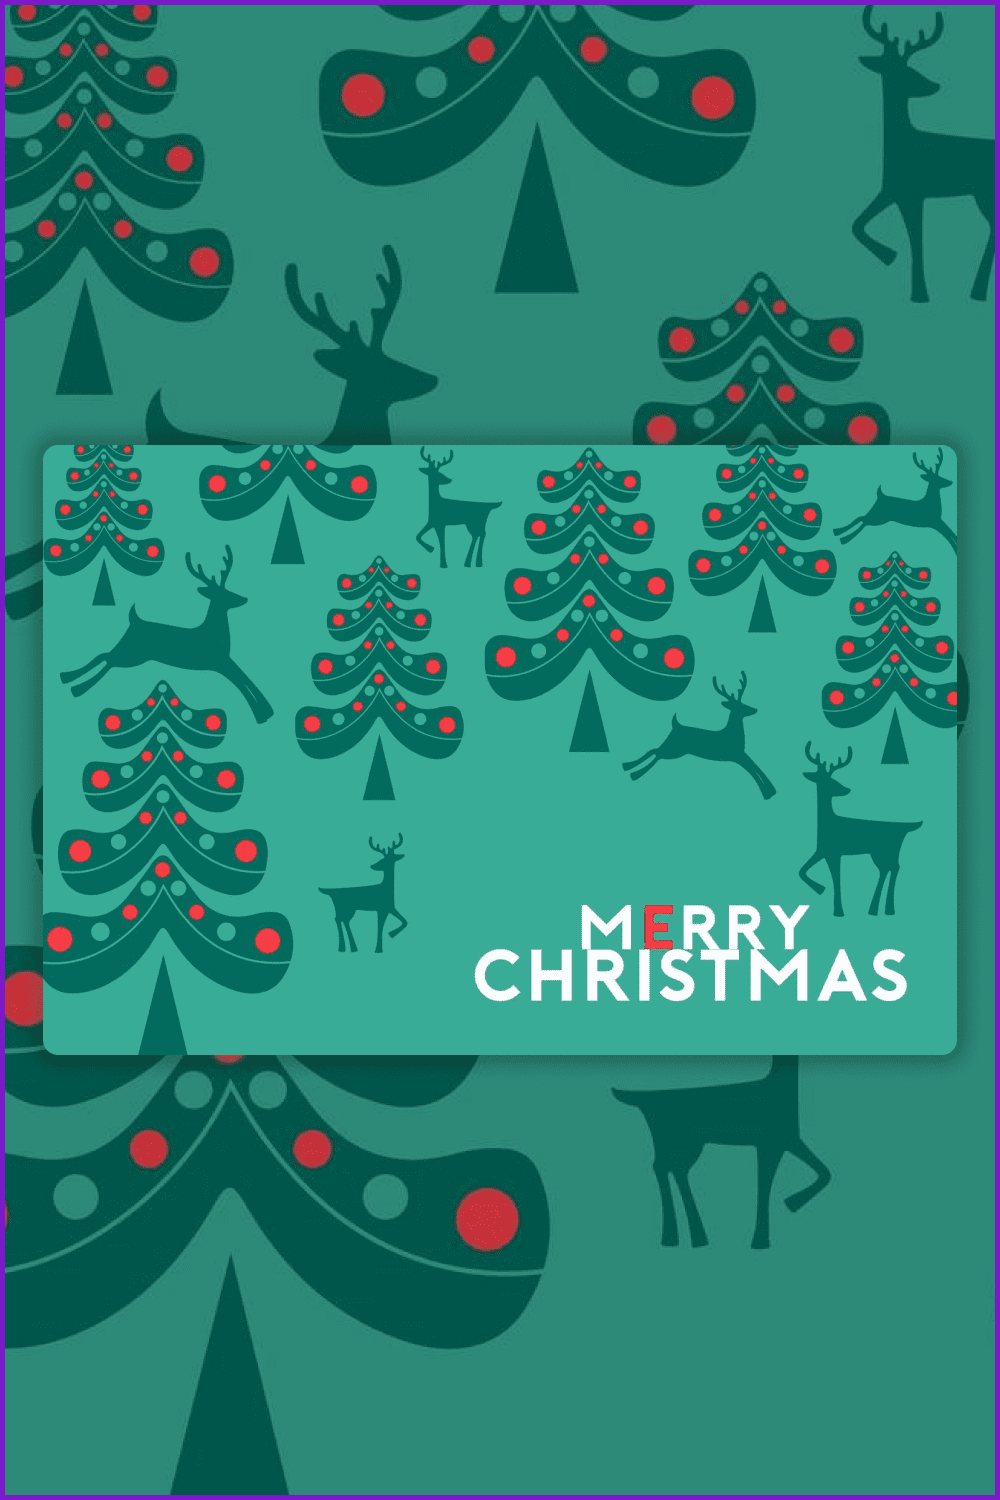 Drawing of stylized Christmas fir trees, deer on a green background with red accents.